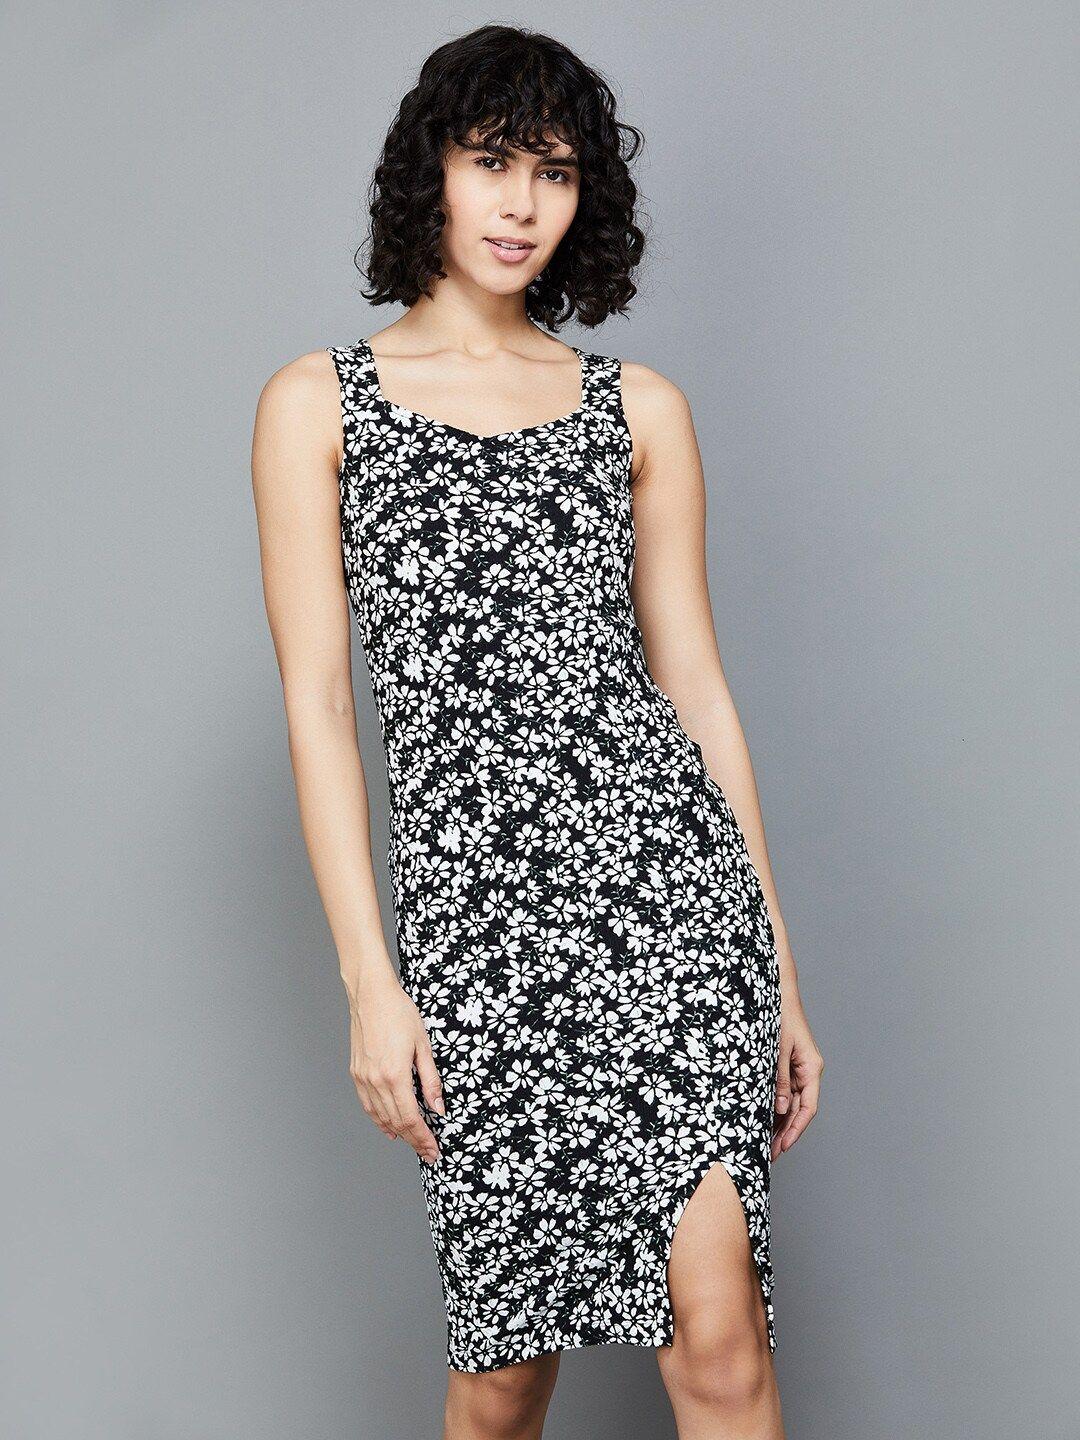 ginger-by-lifestyle-floral-printed-a-line-dress